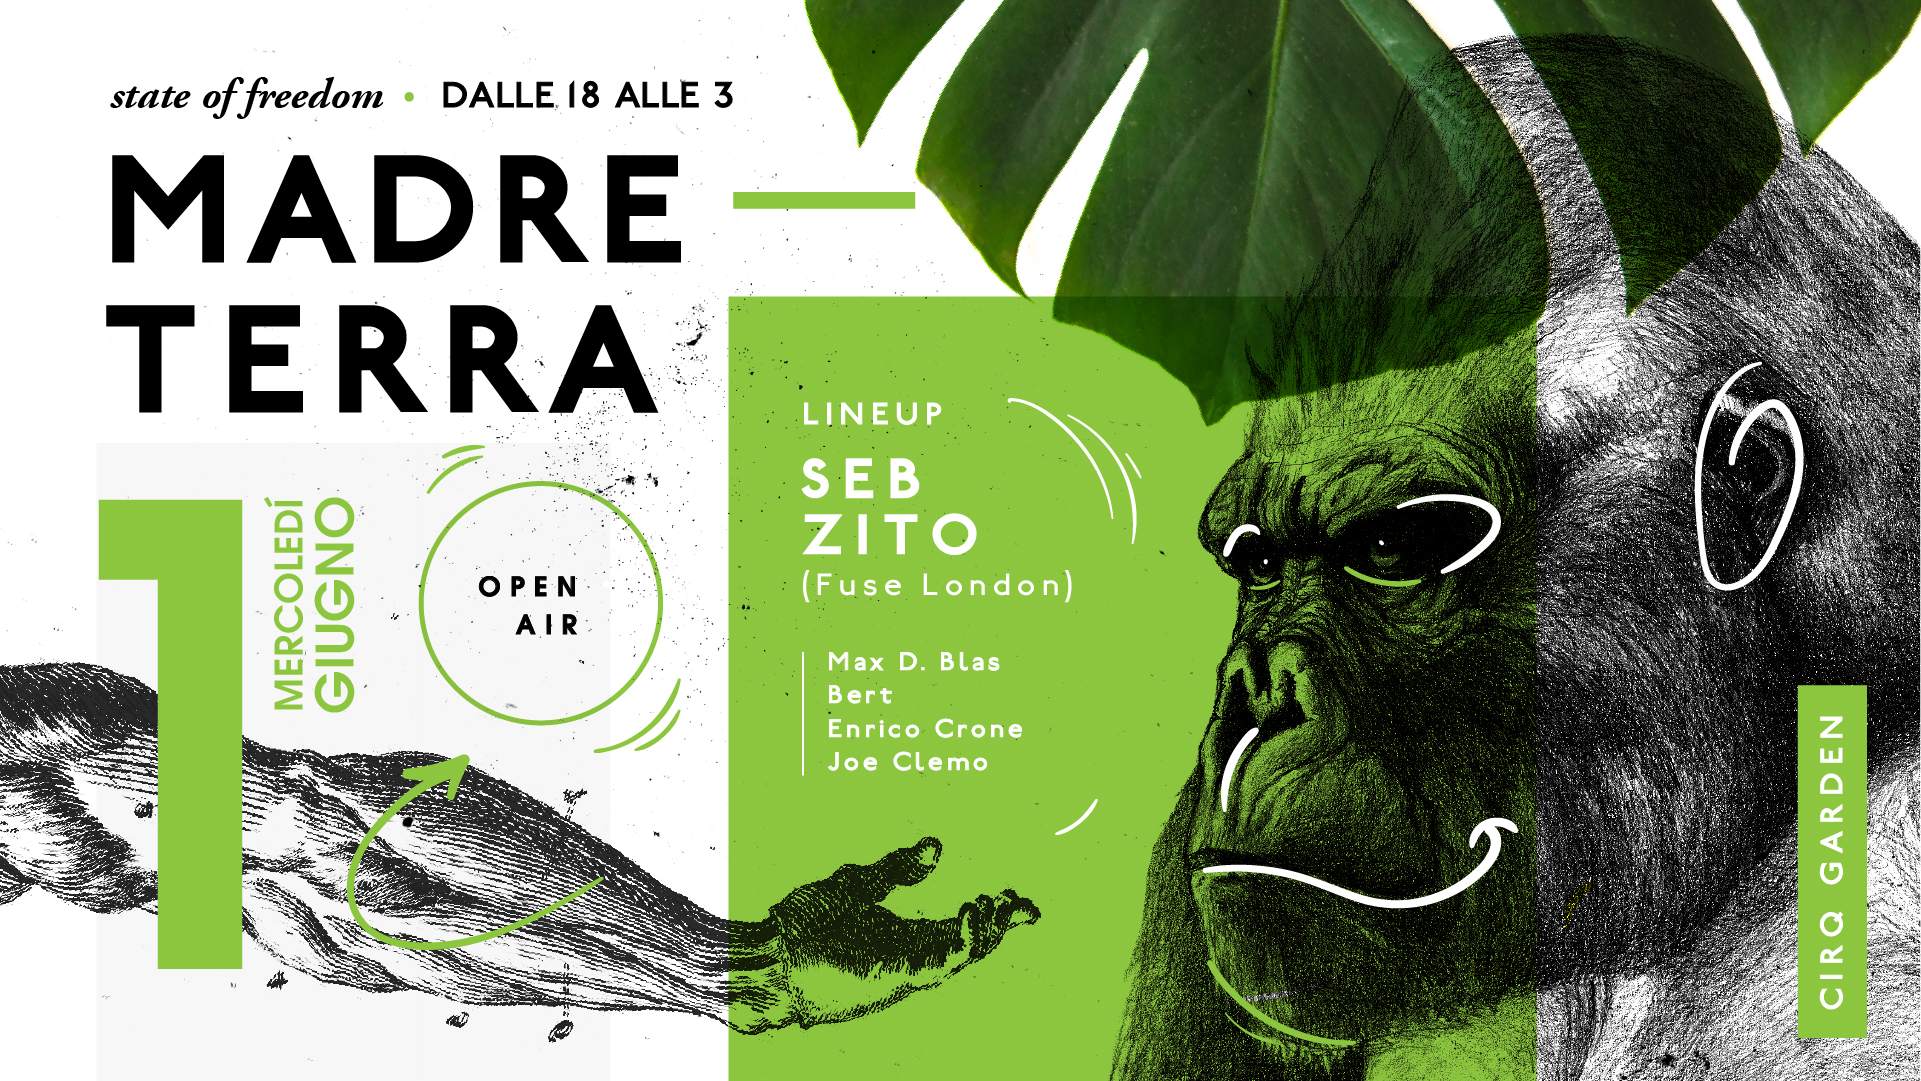 MADRE TERRA Open-Air with Seb Zito (Fuse London) - フライヤー表